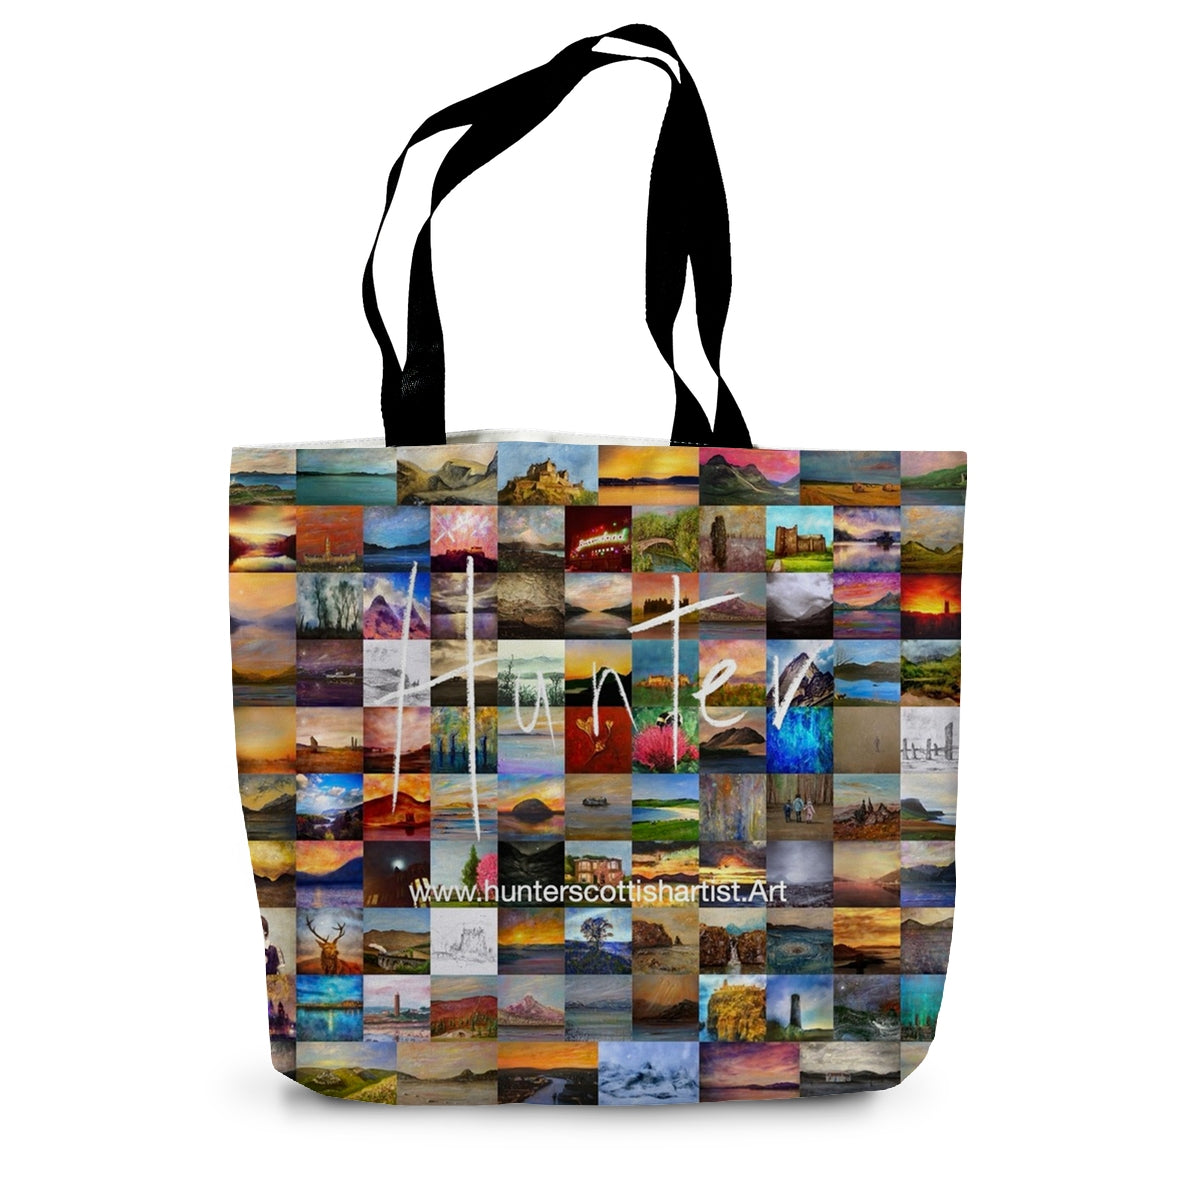 Castle Stalker Sunset Art Gifts Canvas Tote Bag-Bags-Historic & Iconic Scotland Art Gallery-14"x18.5"-Paintings, Prints, Homeware, Art Gifts From Scotland By Scottish Artist Kevin Hunter